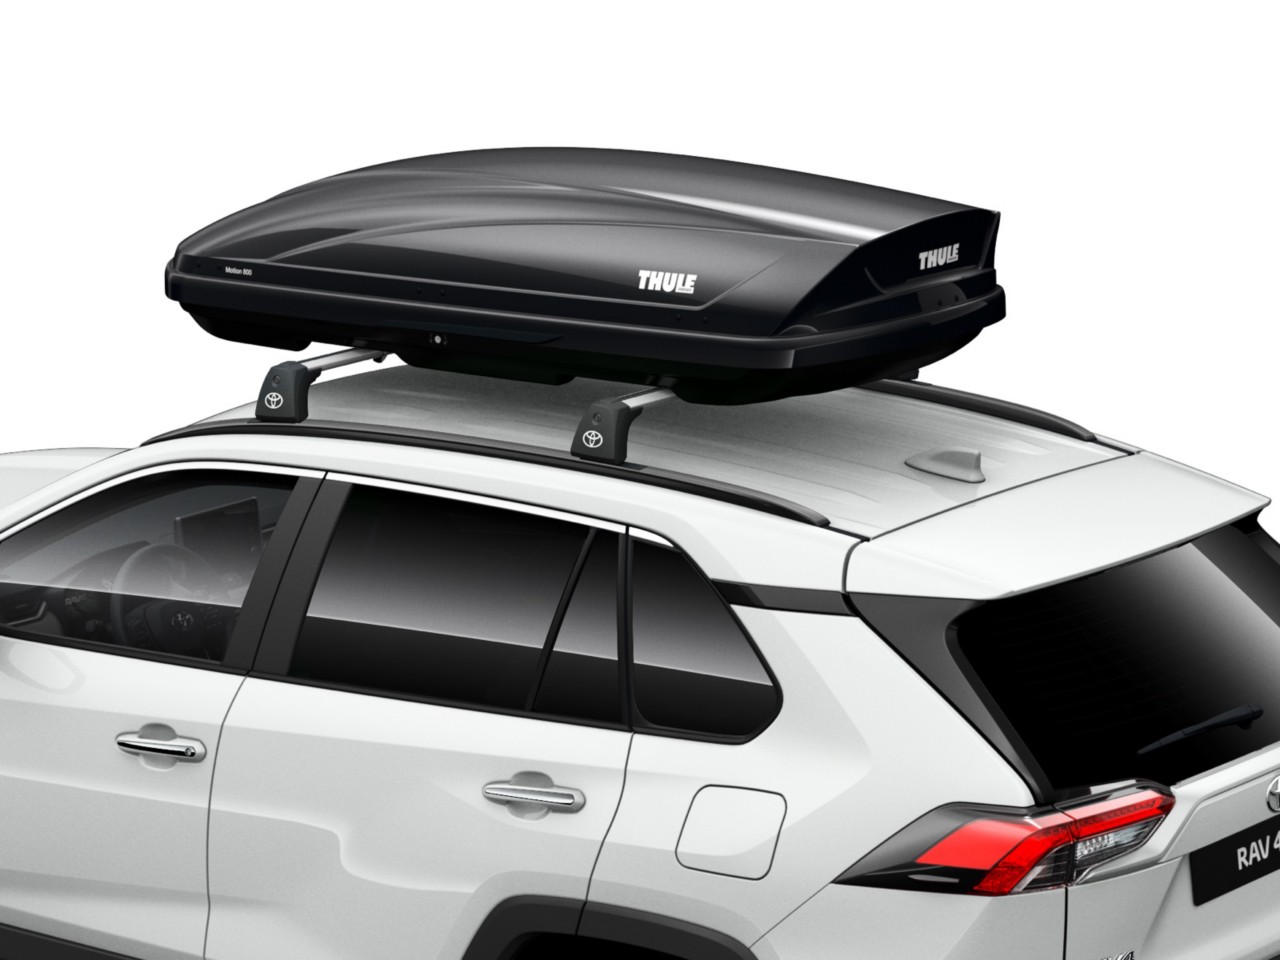 Roof Rack with storage pod attached